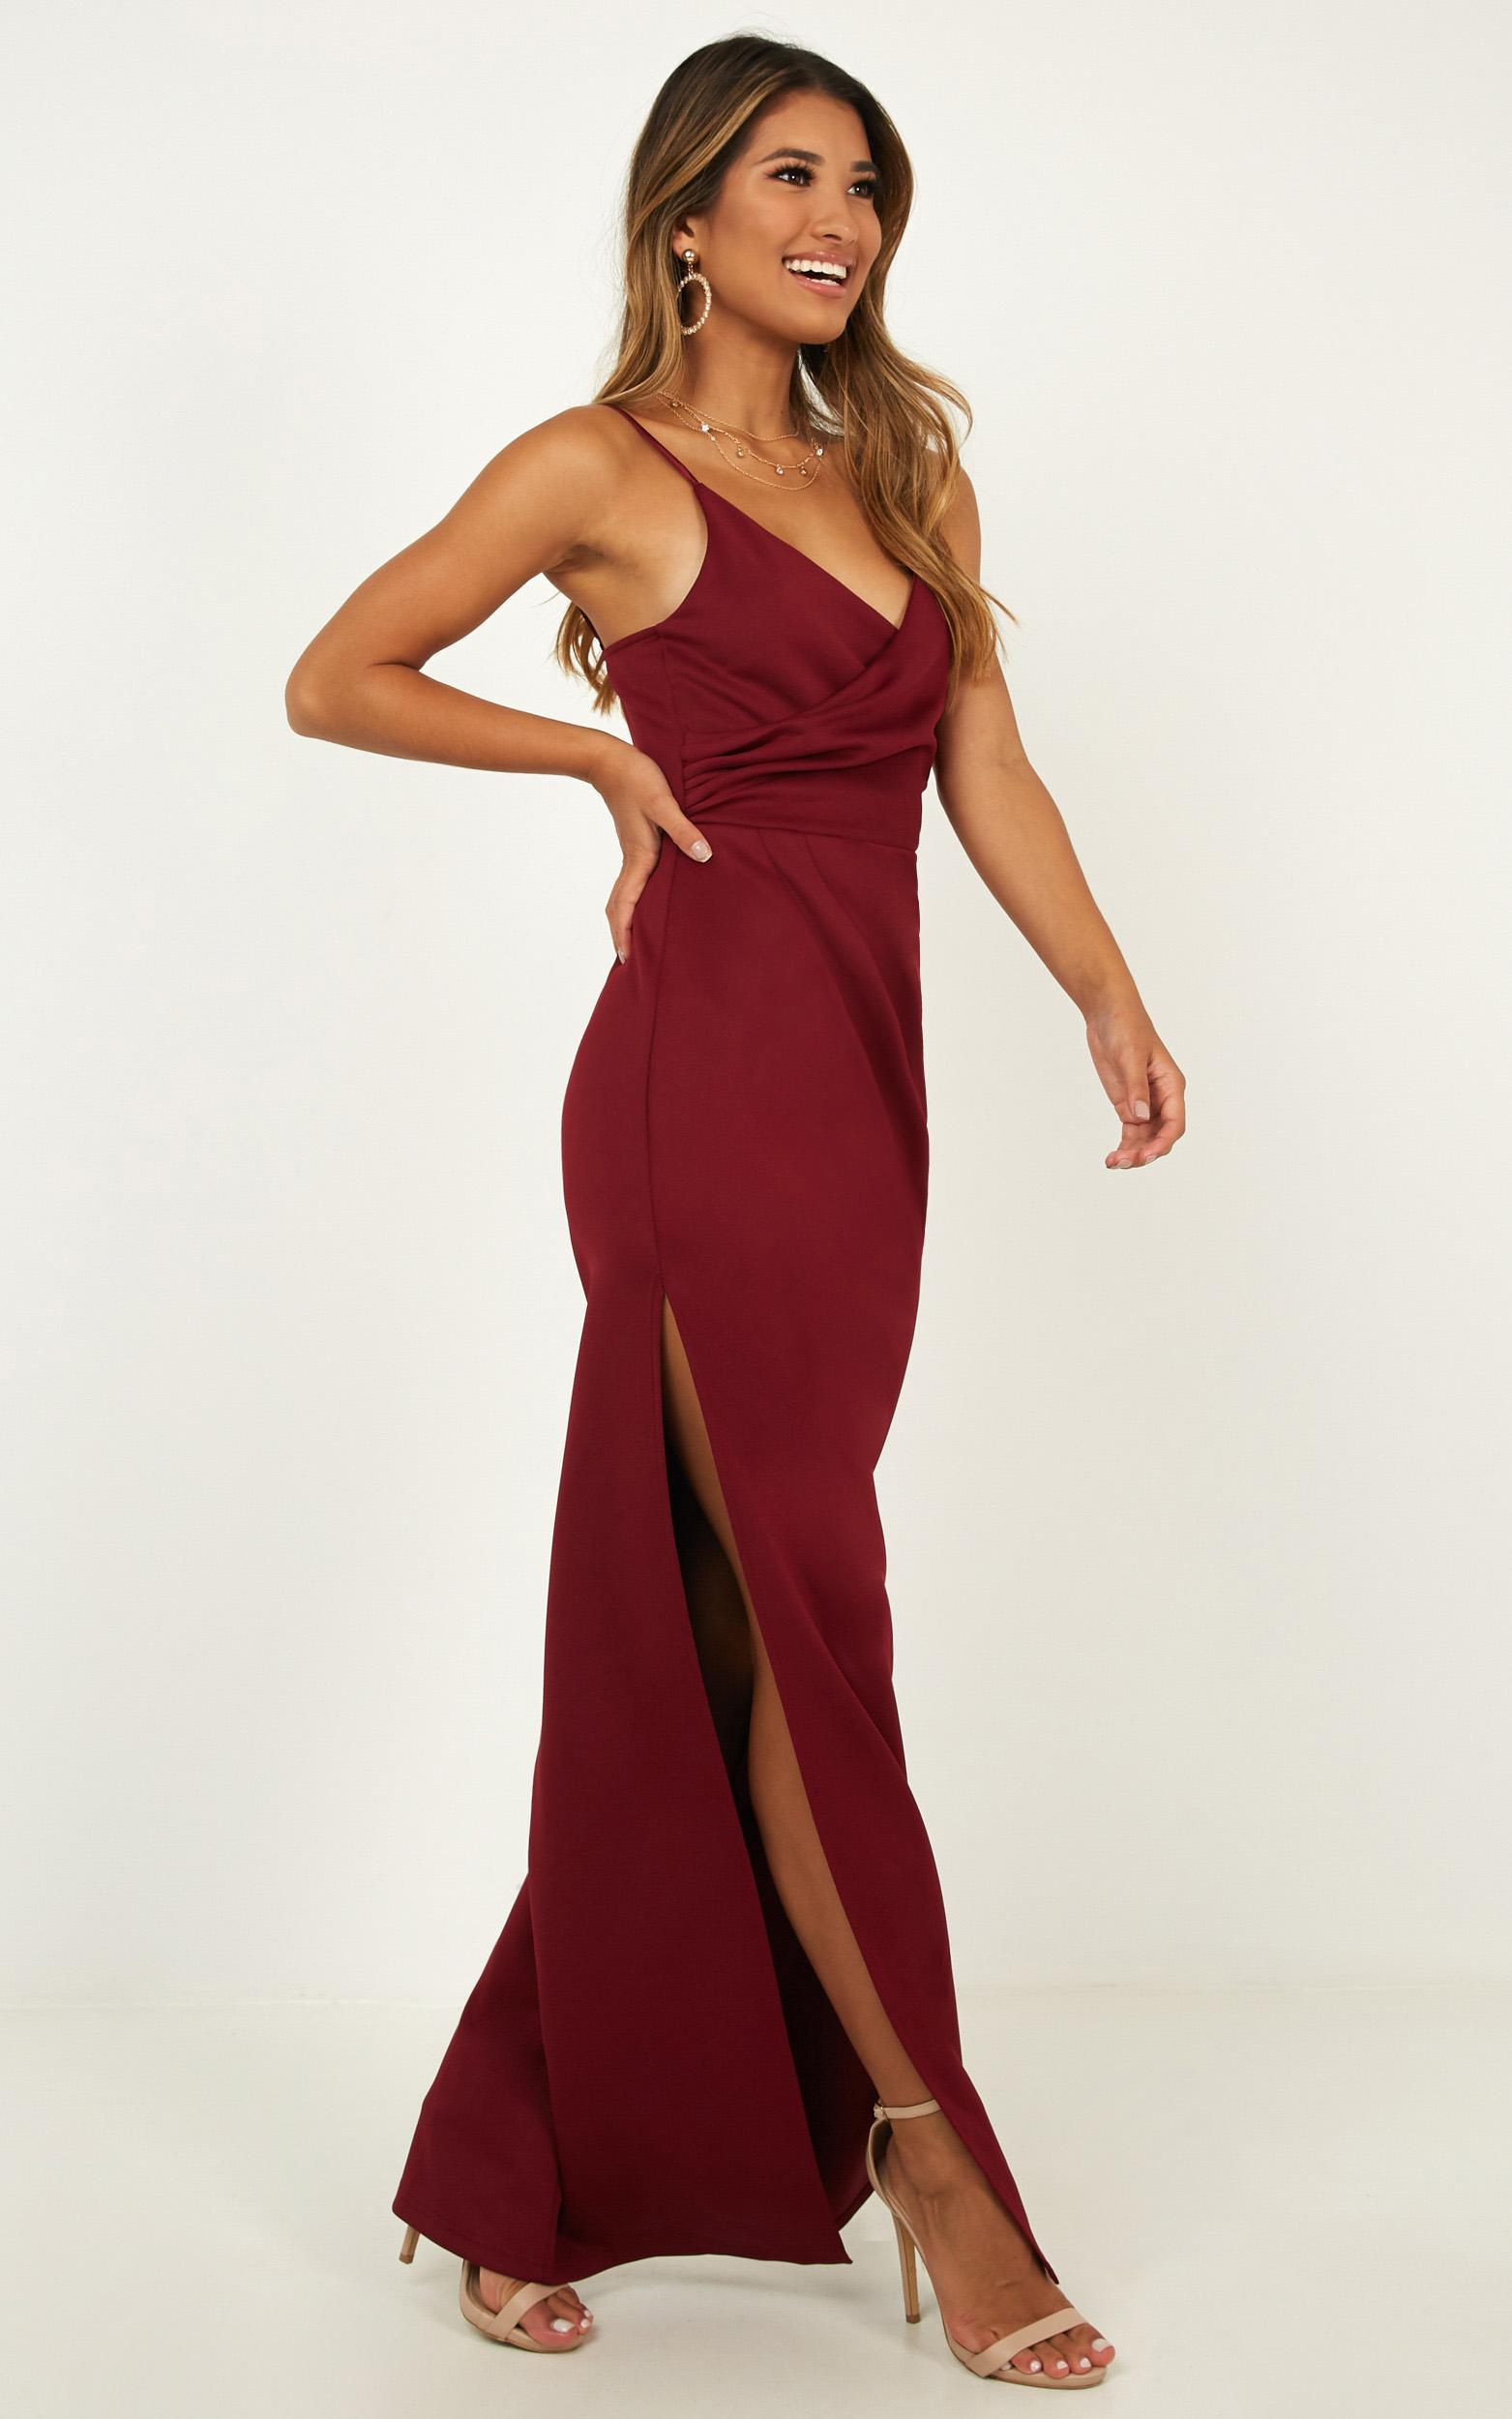 Linking Love Slip Maxi Dress in Wine - 04, WNE5, hi-res image number null